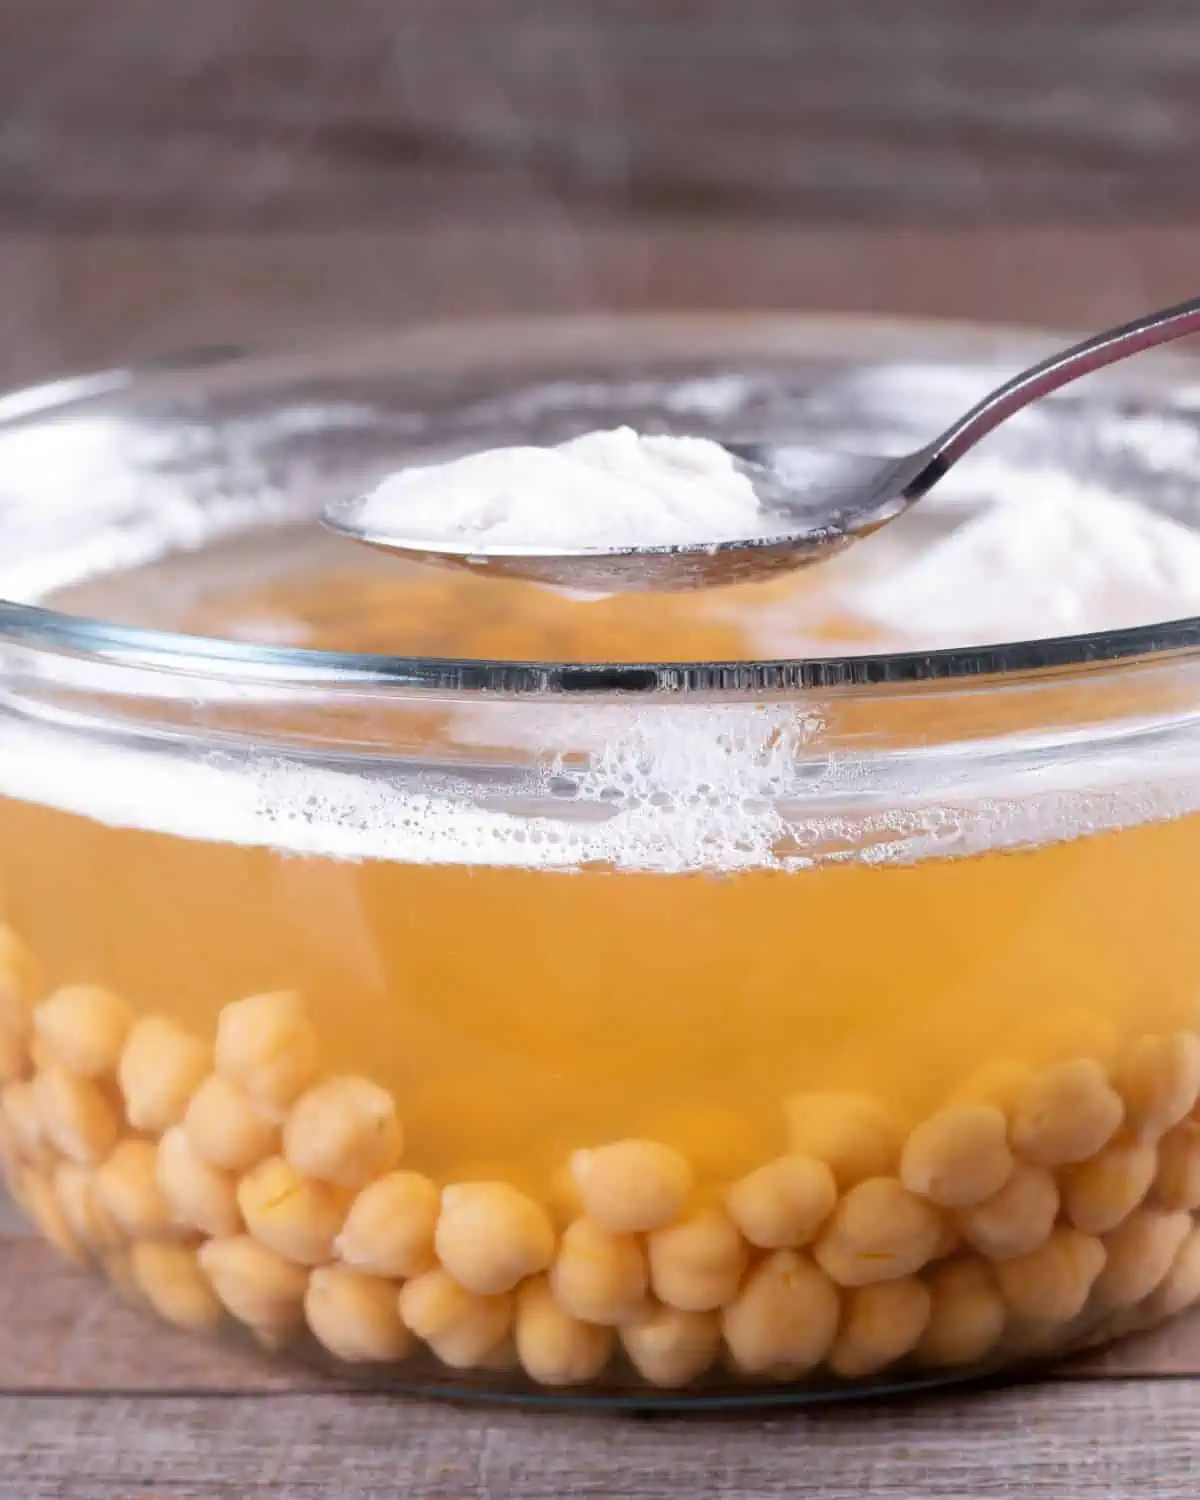 Glass bowl of chickpeas and chickpea liquid to show what Aquafaba is. The image is for a recipe post on how to use aquafaba in place of eggs.